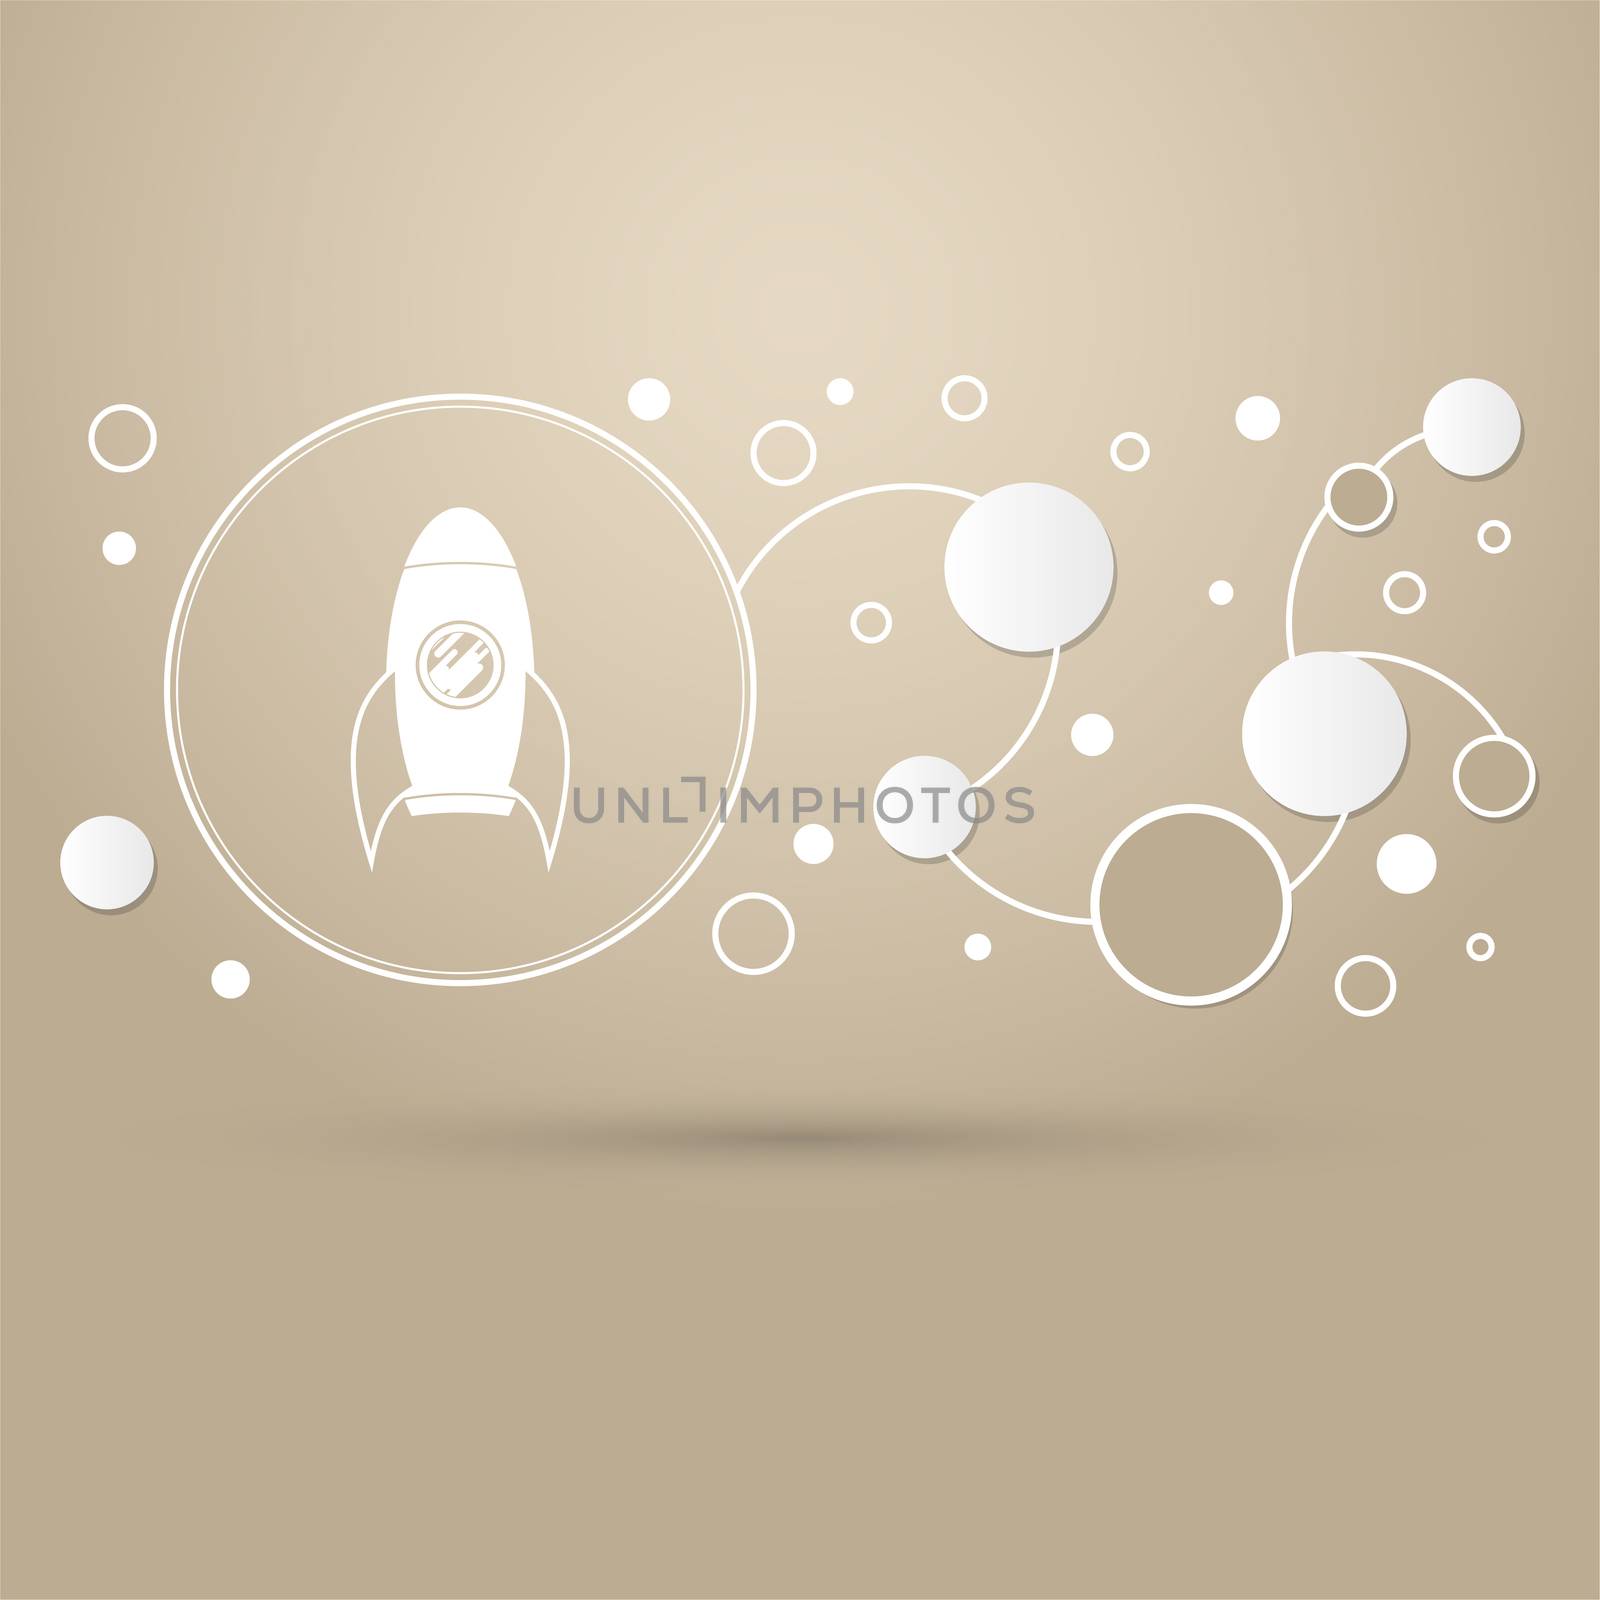 Rocket icon on a brown background with elegant style and modern design infographic.  by Adamchuk